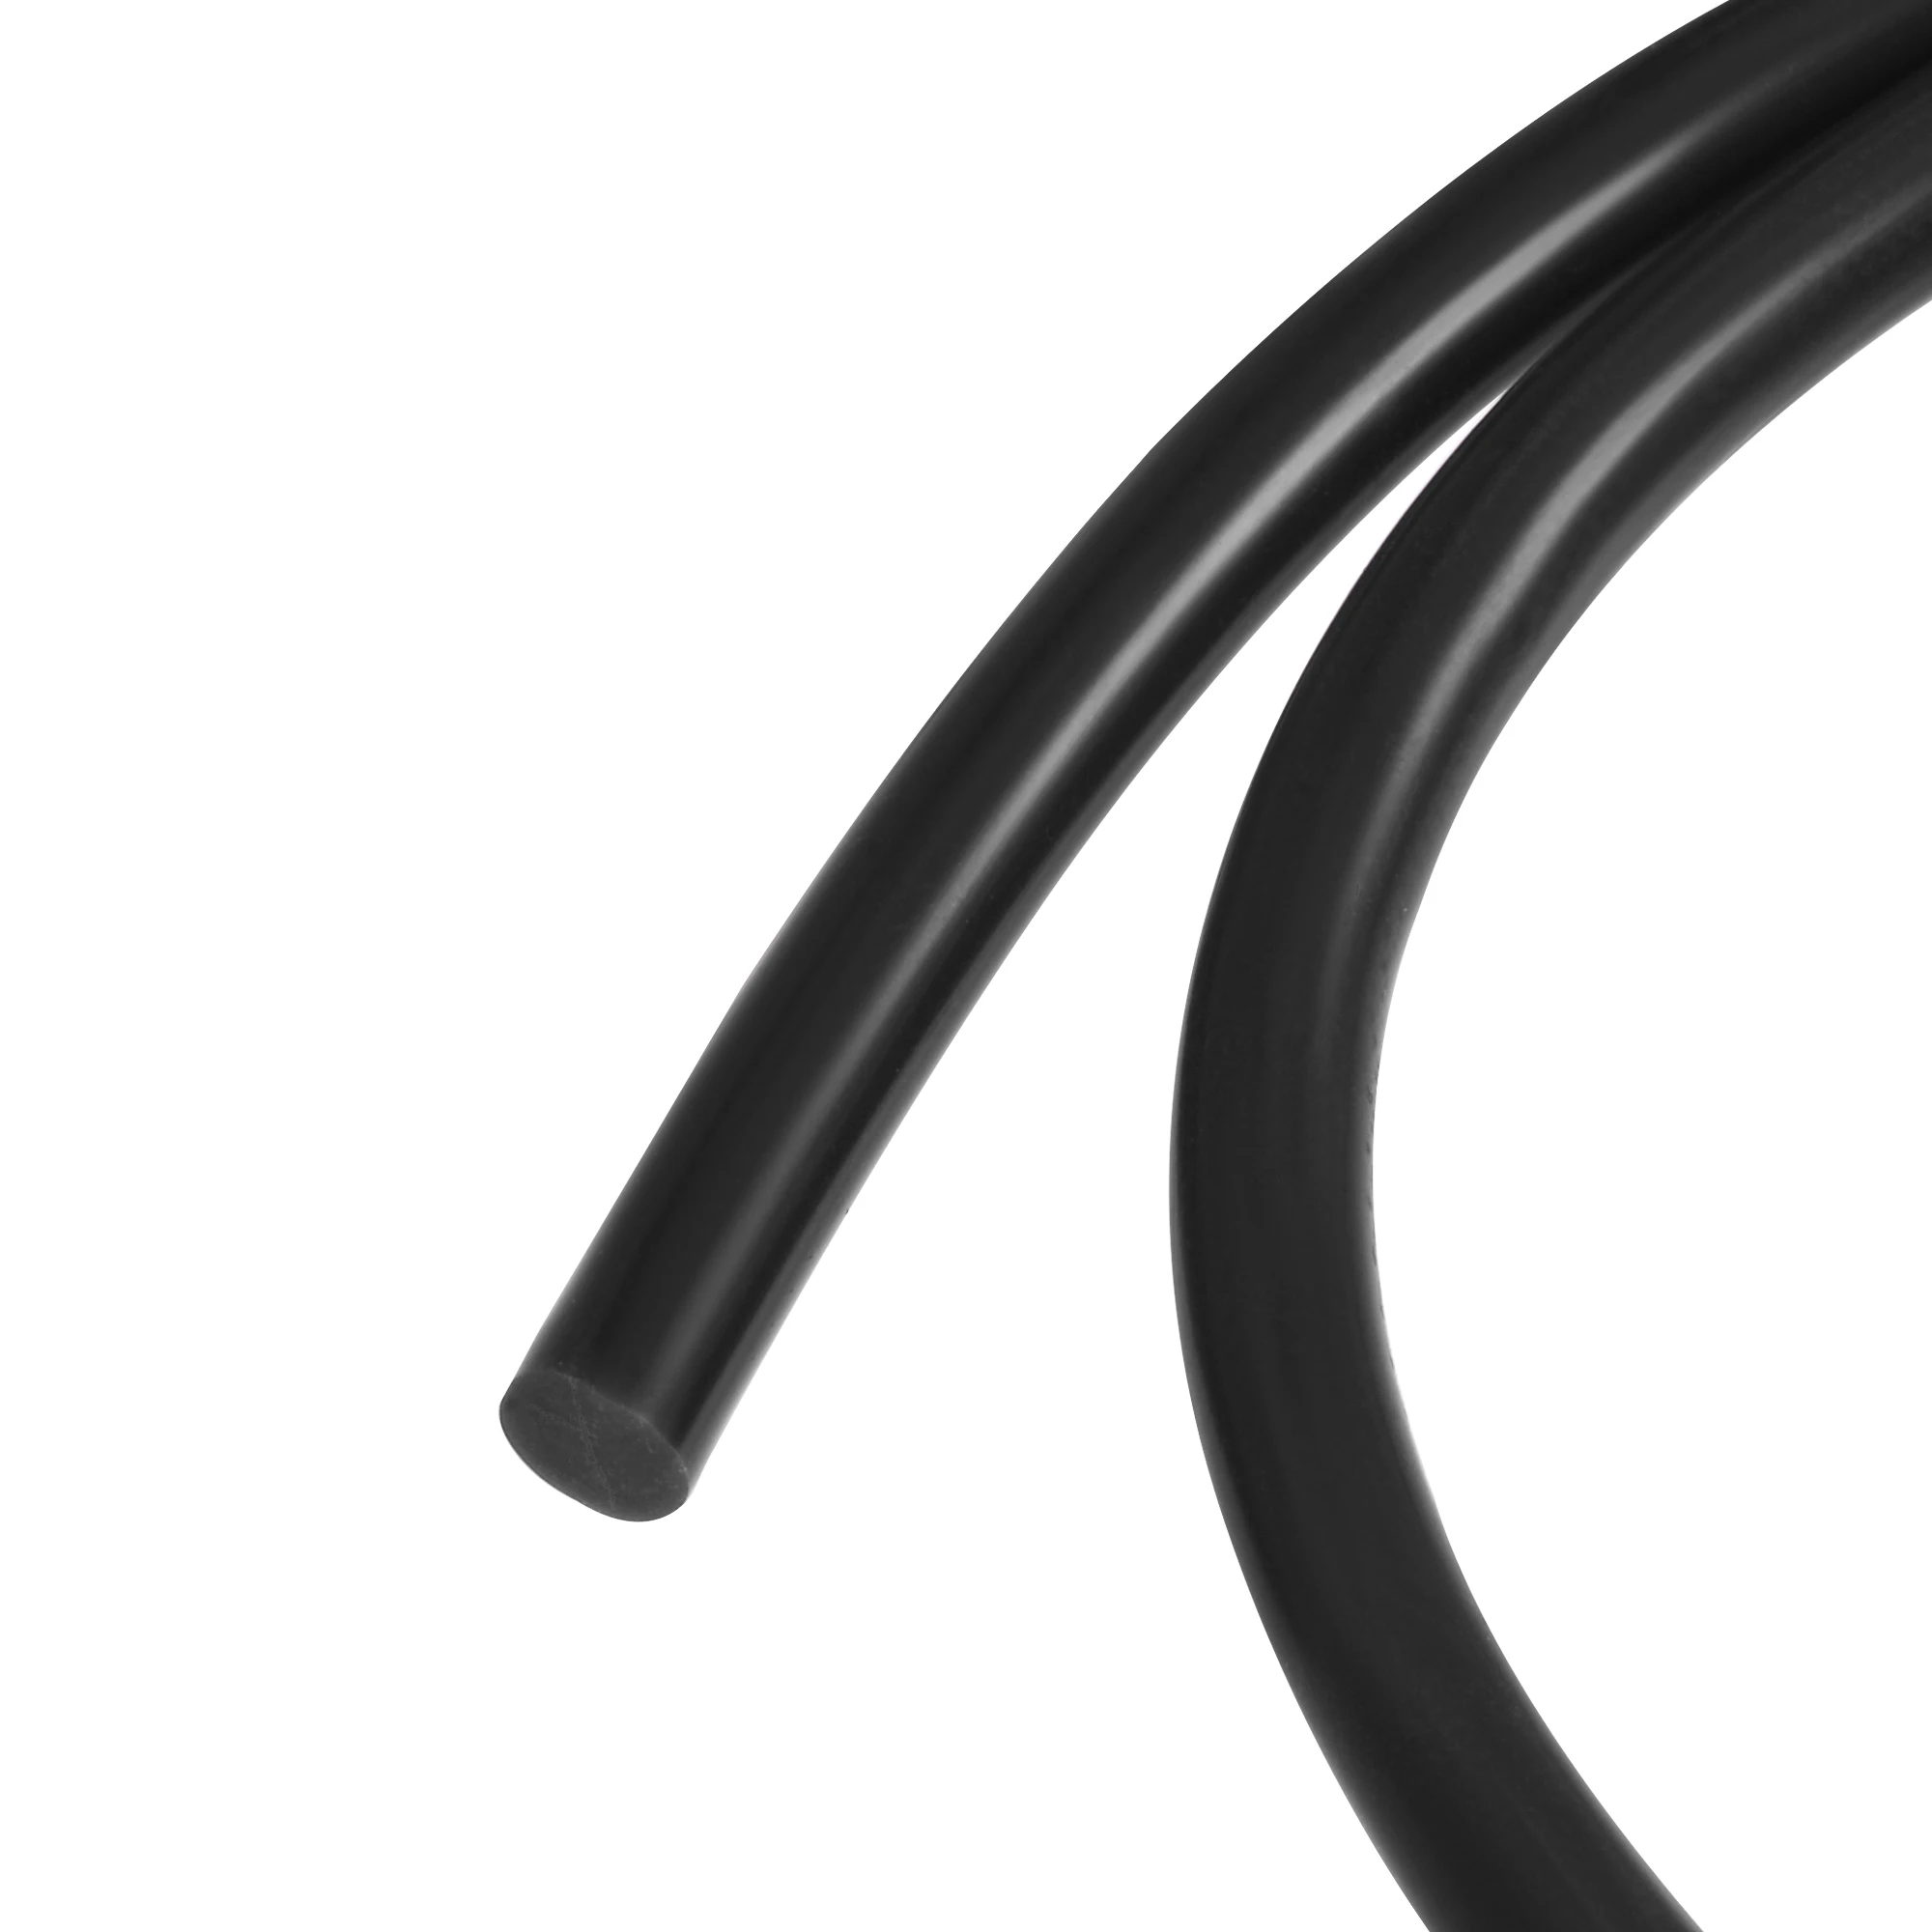 

Uxcell Silicone Bending Insert Hard Tube 5/16" 5ft Black Soft for Rigid PETG Tubing Water Cooling